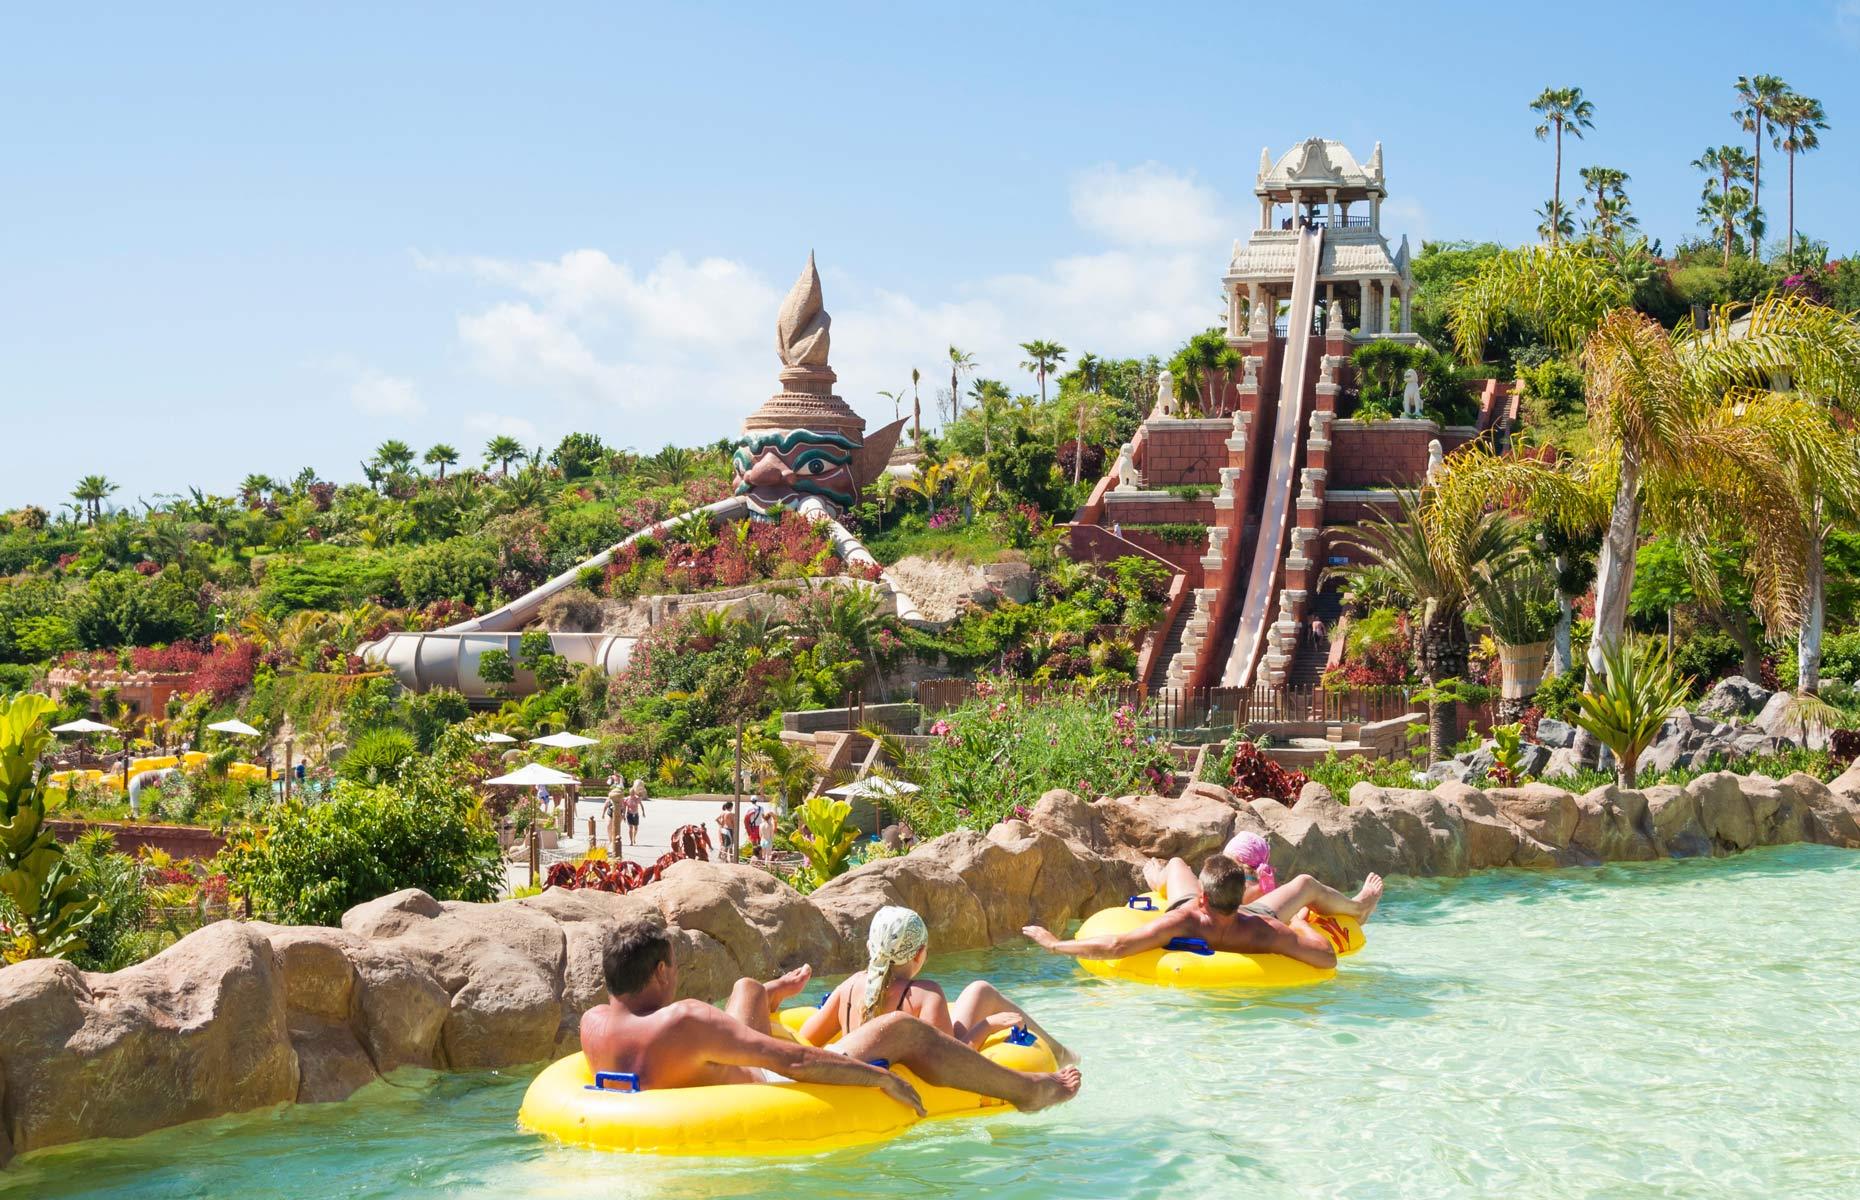 <p>This Thailand-themed attraction in Tenerife has often been named among the world's best waterparks by Tripadvisor, and for good reason. Top attractions are the Tower of Power, where riders can reach speeds of around 50 miles per hour (80km/h) as they swoop down the 90-foot-high (28m) slide into an aquarium filled with stingrays and sharks. Tackle the Mekong Rapids on a giant inflatable with your mates or dare them to take on the Dragon, a totally vertical funnel. Recover on Siam Beach.</p>